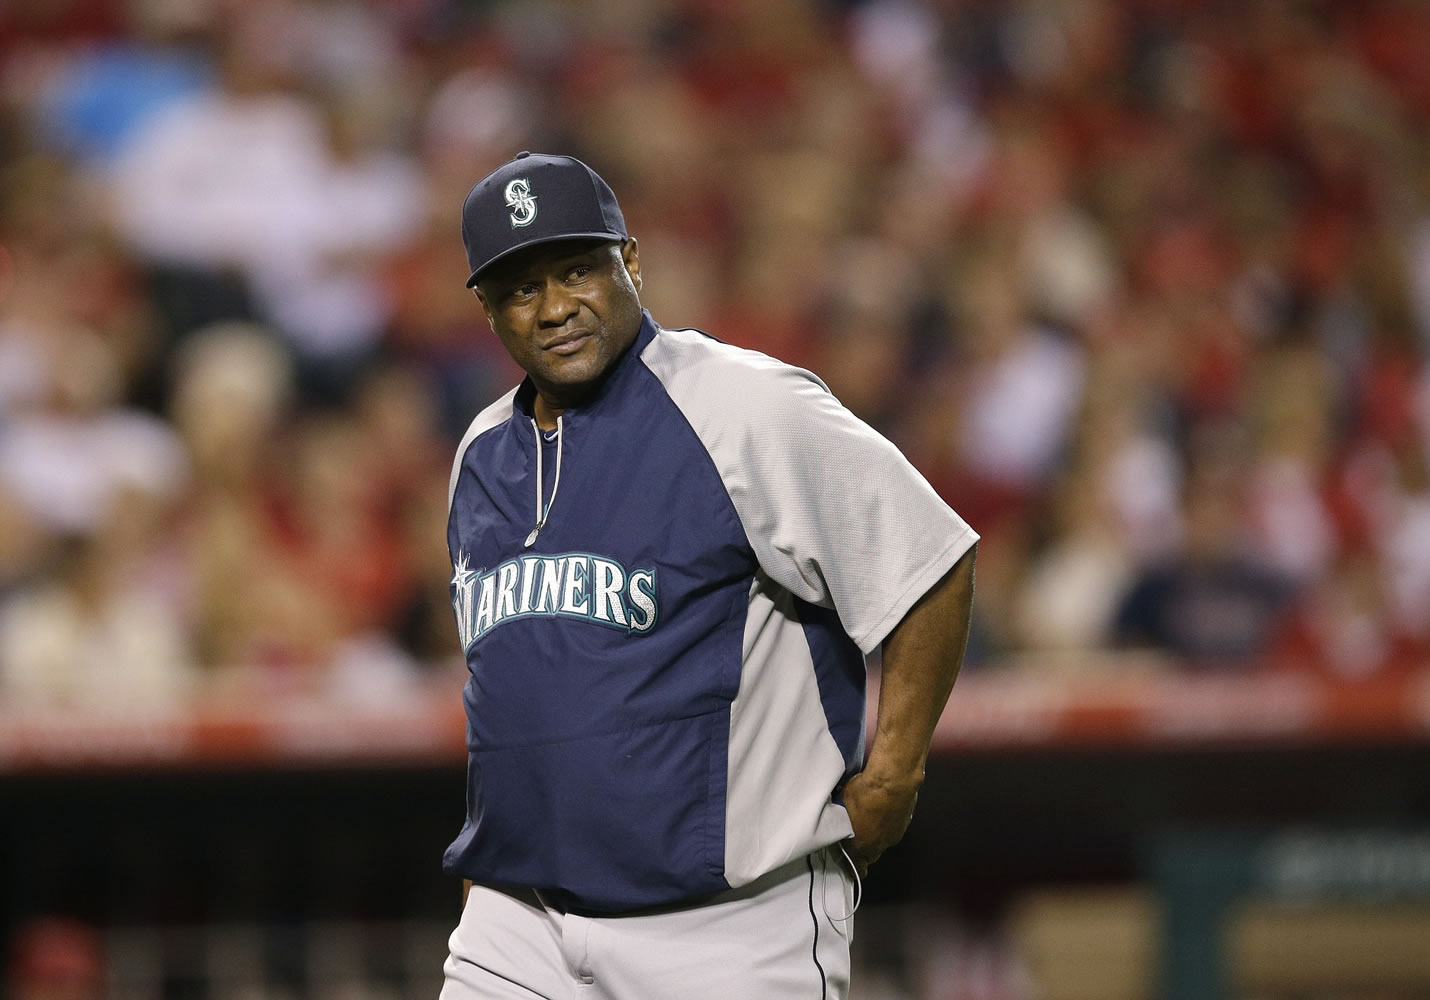 Seattle Mariners manager Lloyd McClendon walks off the field during a game last season.